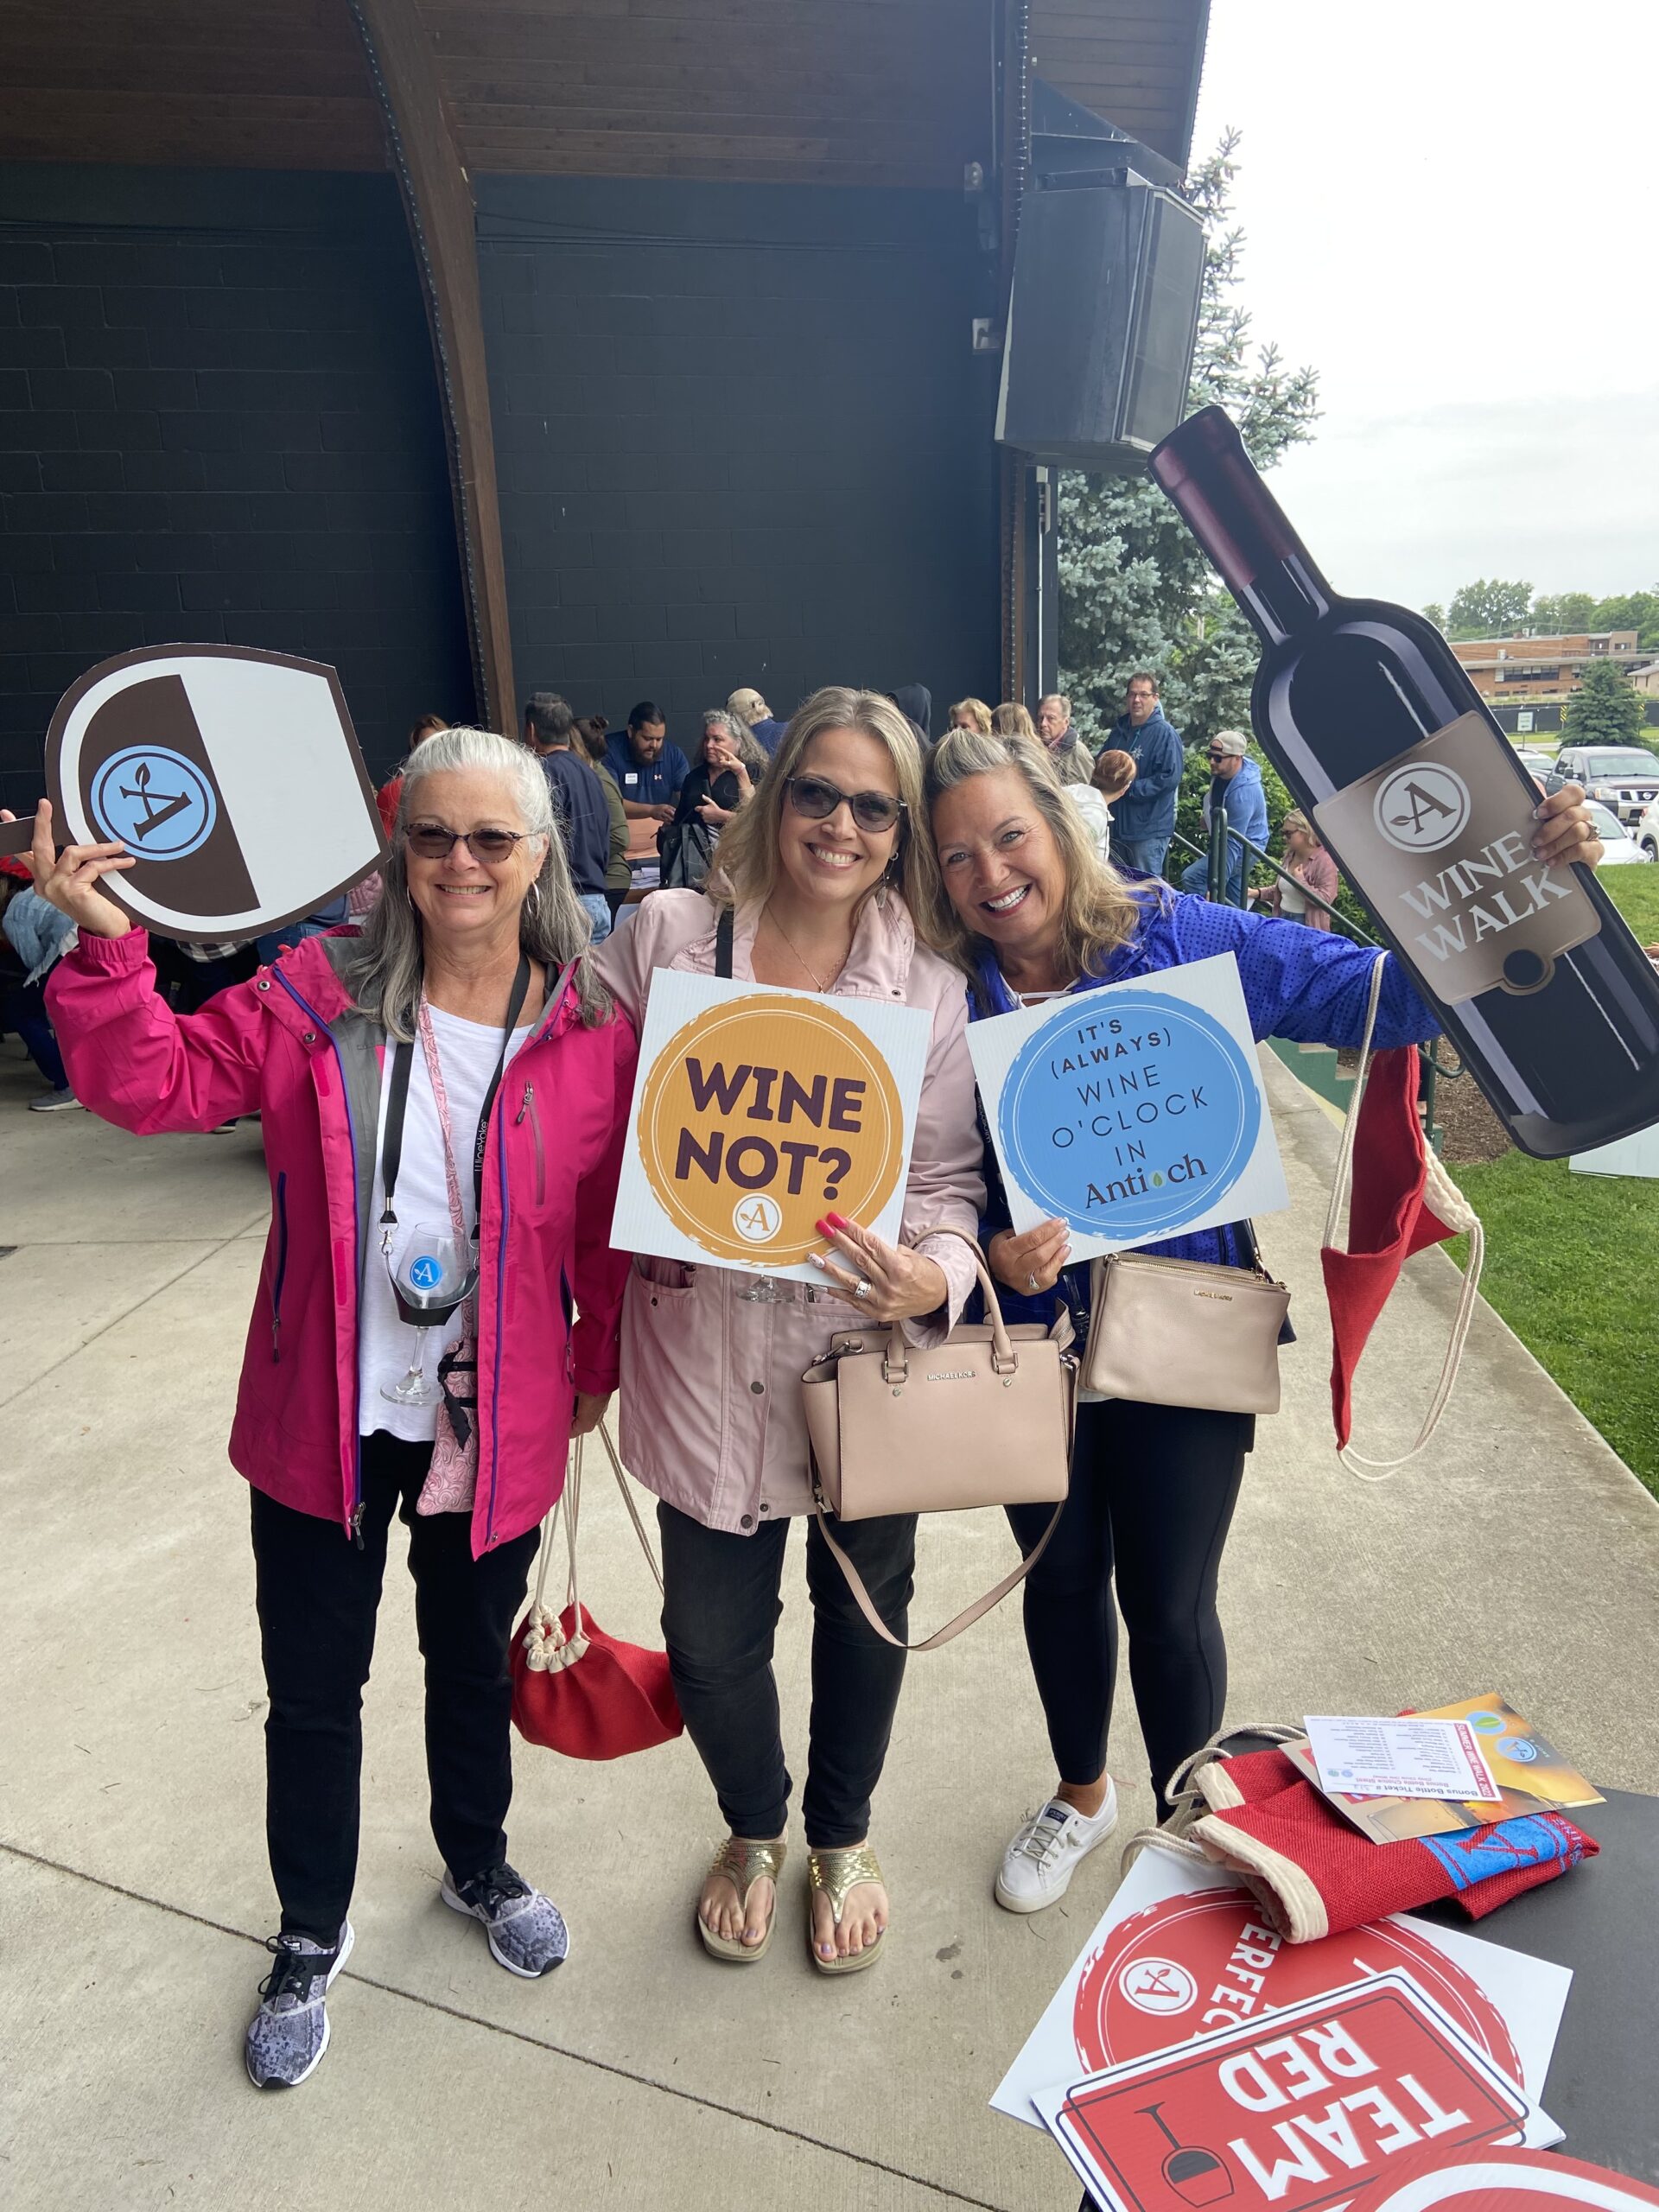 <h1 class="tribe-events-single-event-title">Annual Antioch Wine Walk is here!</h1>